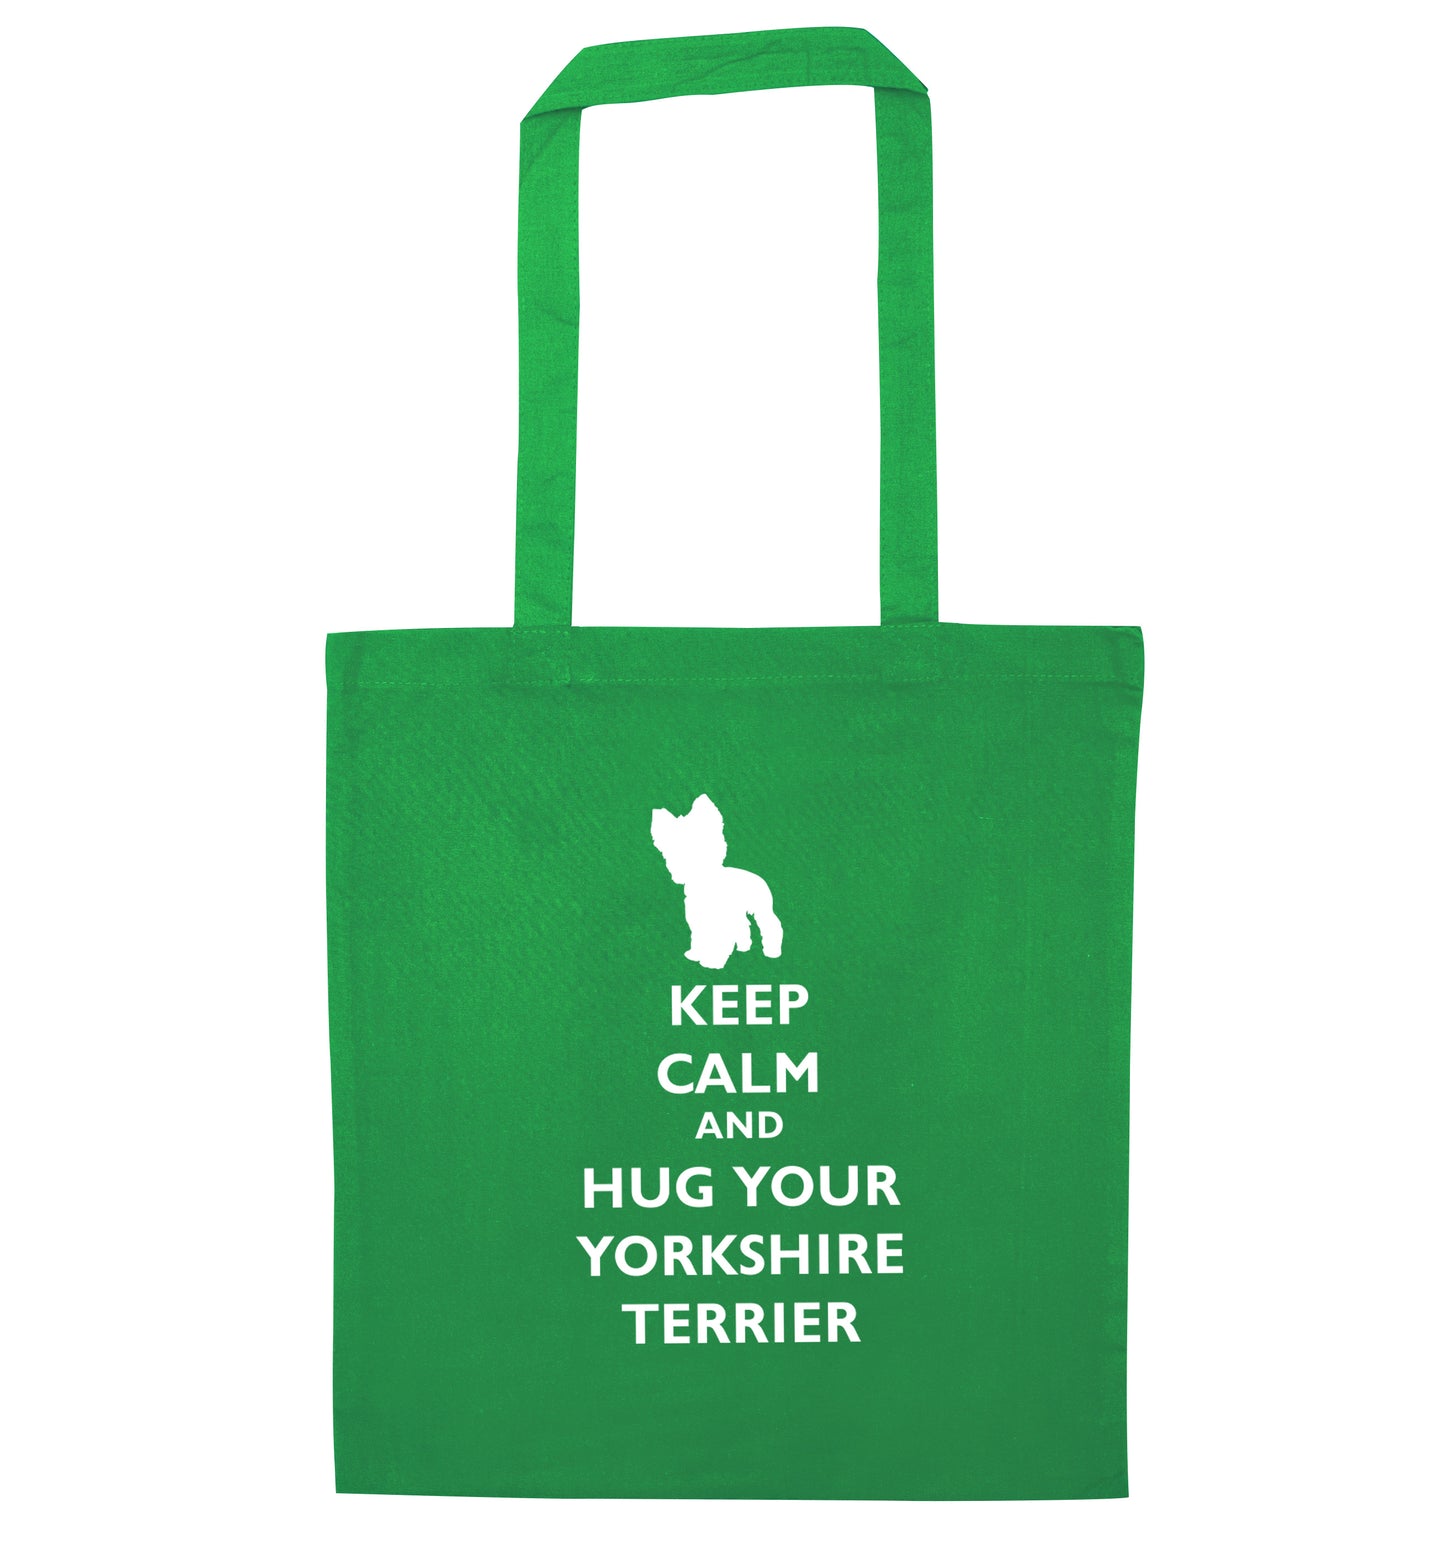 Keep calm and hug your yorkshire terrier green tote bag